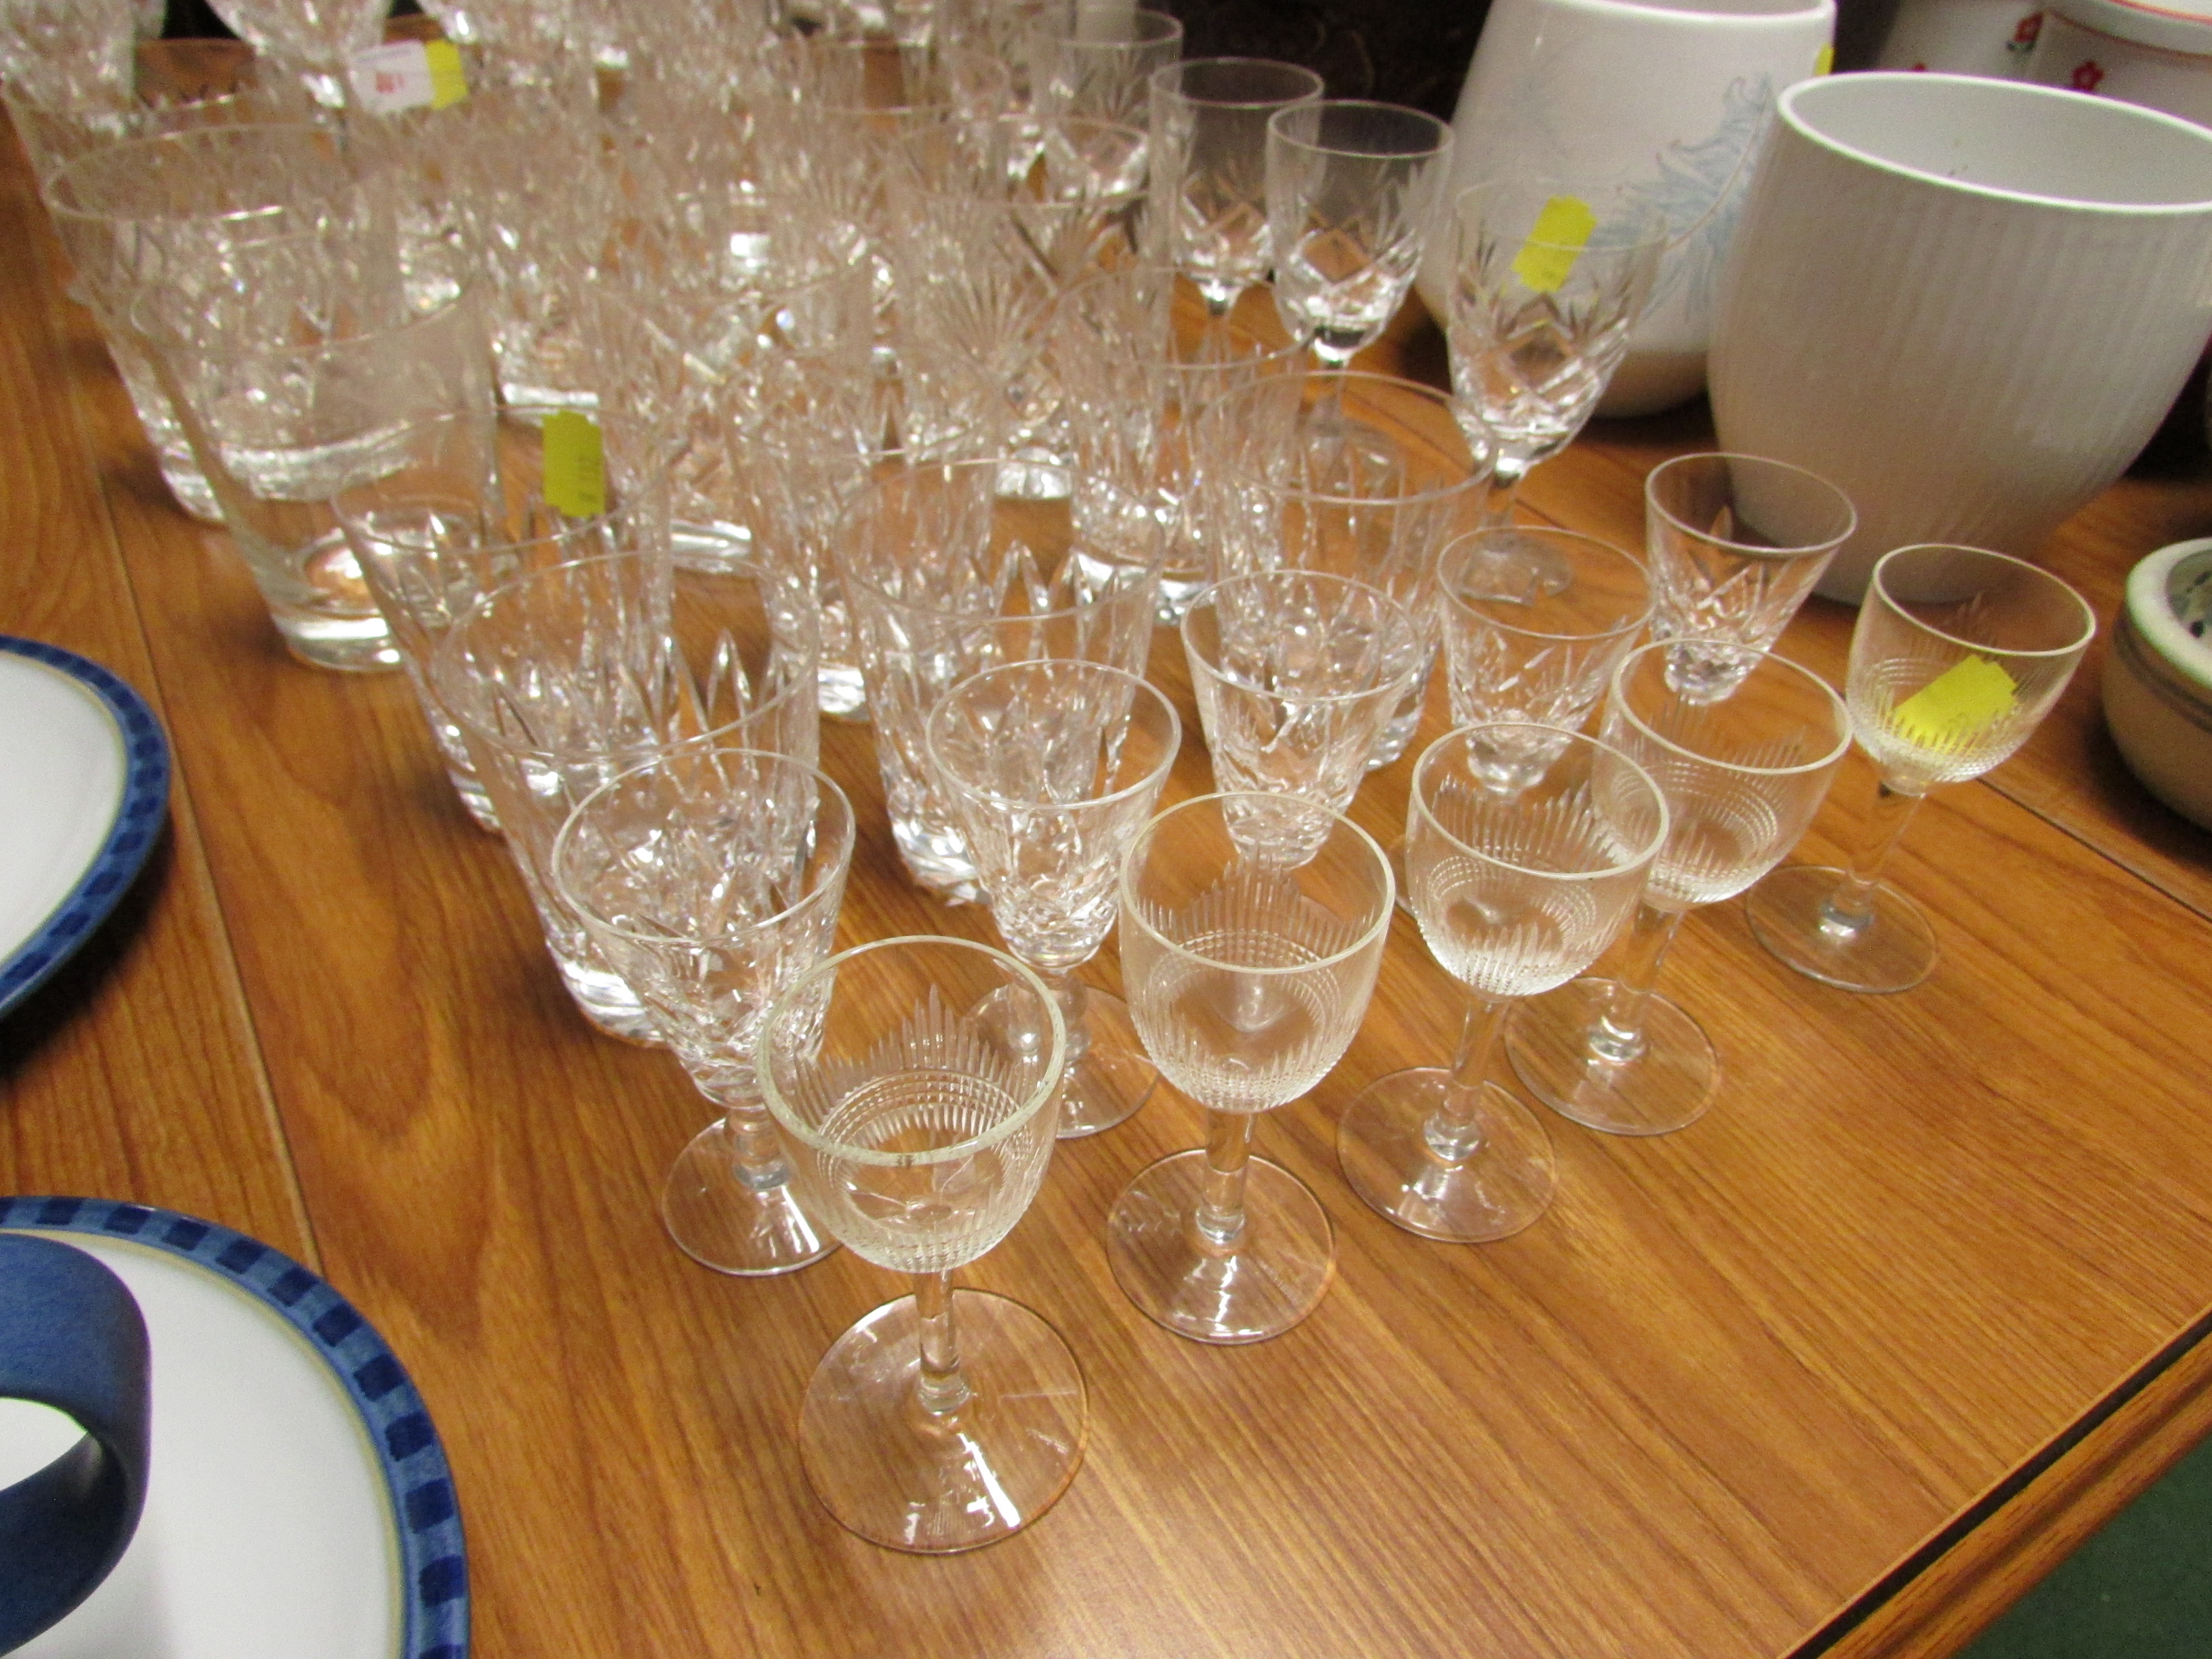 CUT GLASS DRINKING GLASSES INCLUDING ROYAL BRIERLEY BRANDY GLASSES, TUMBLERS AND SMALL WINE GLASSES - Image 4 of 4